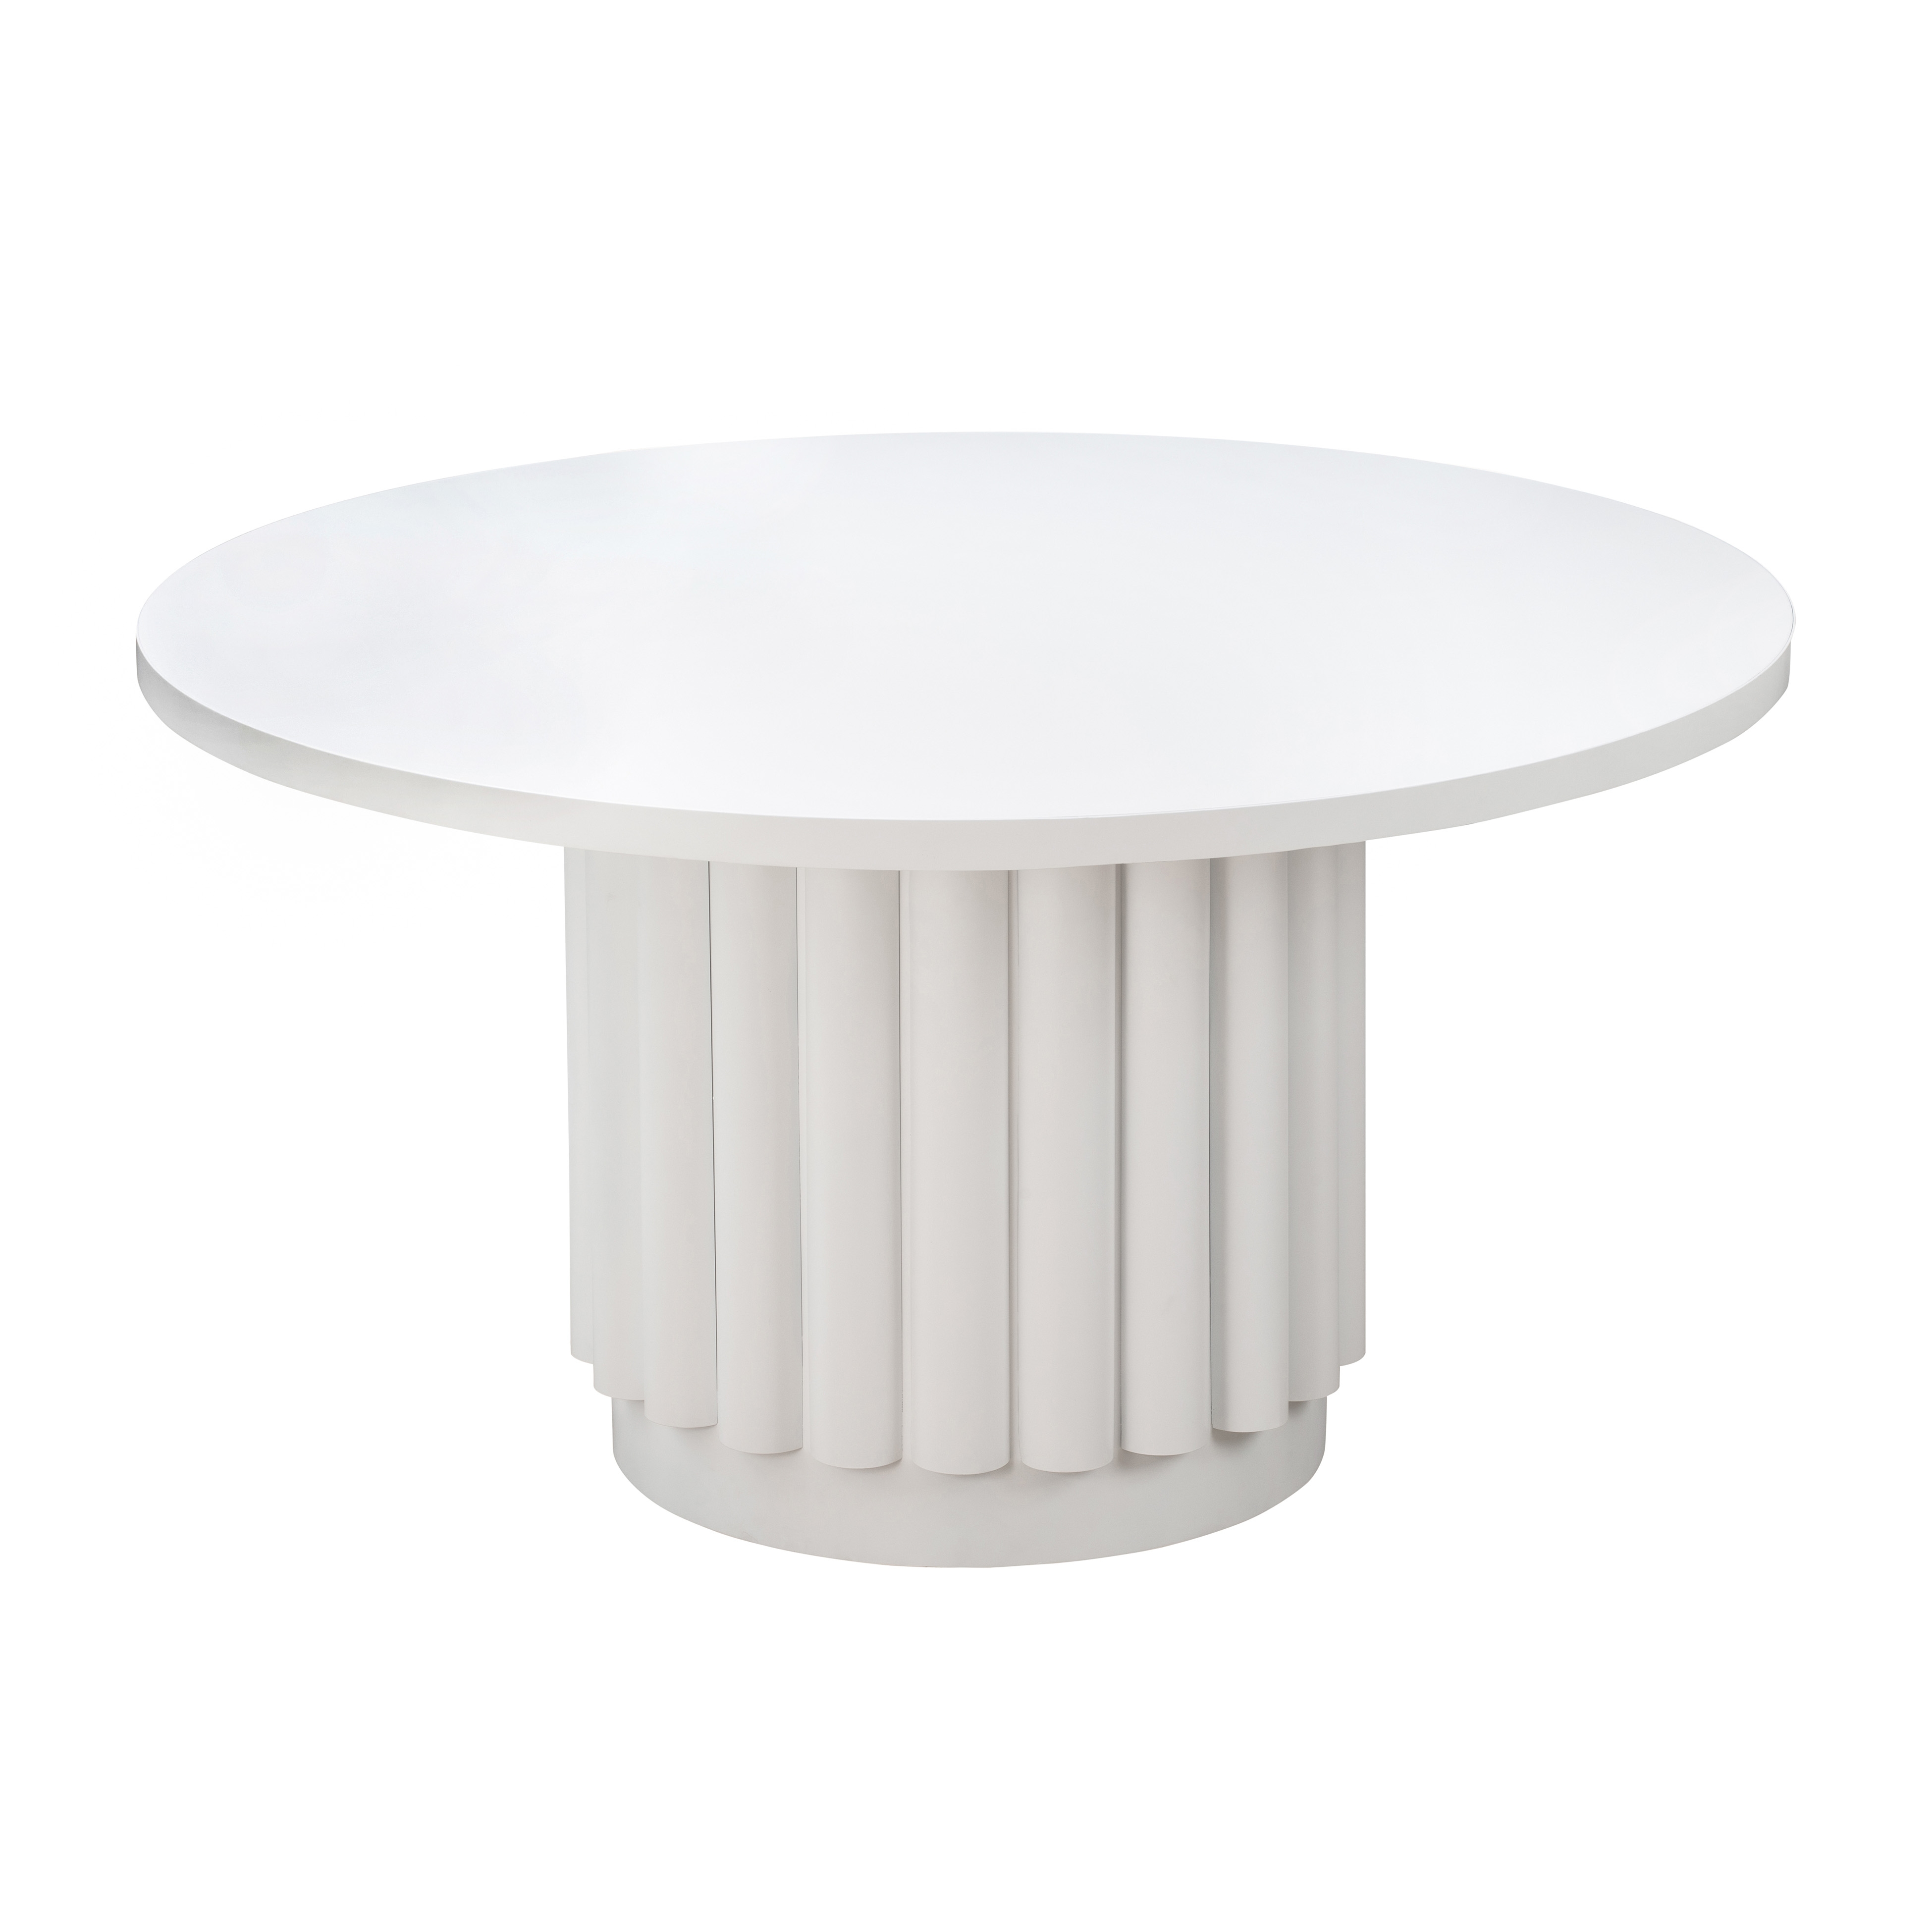 Kali 55 Inch White Round Dining Table - Image 2